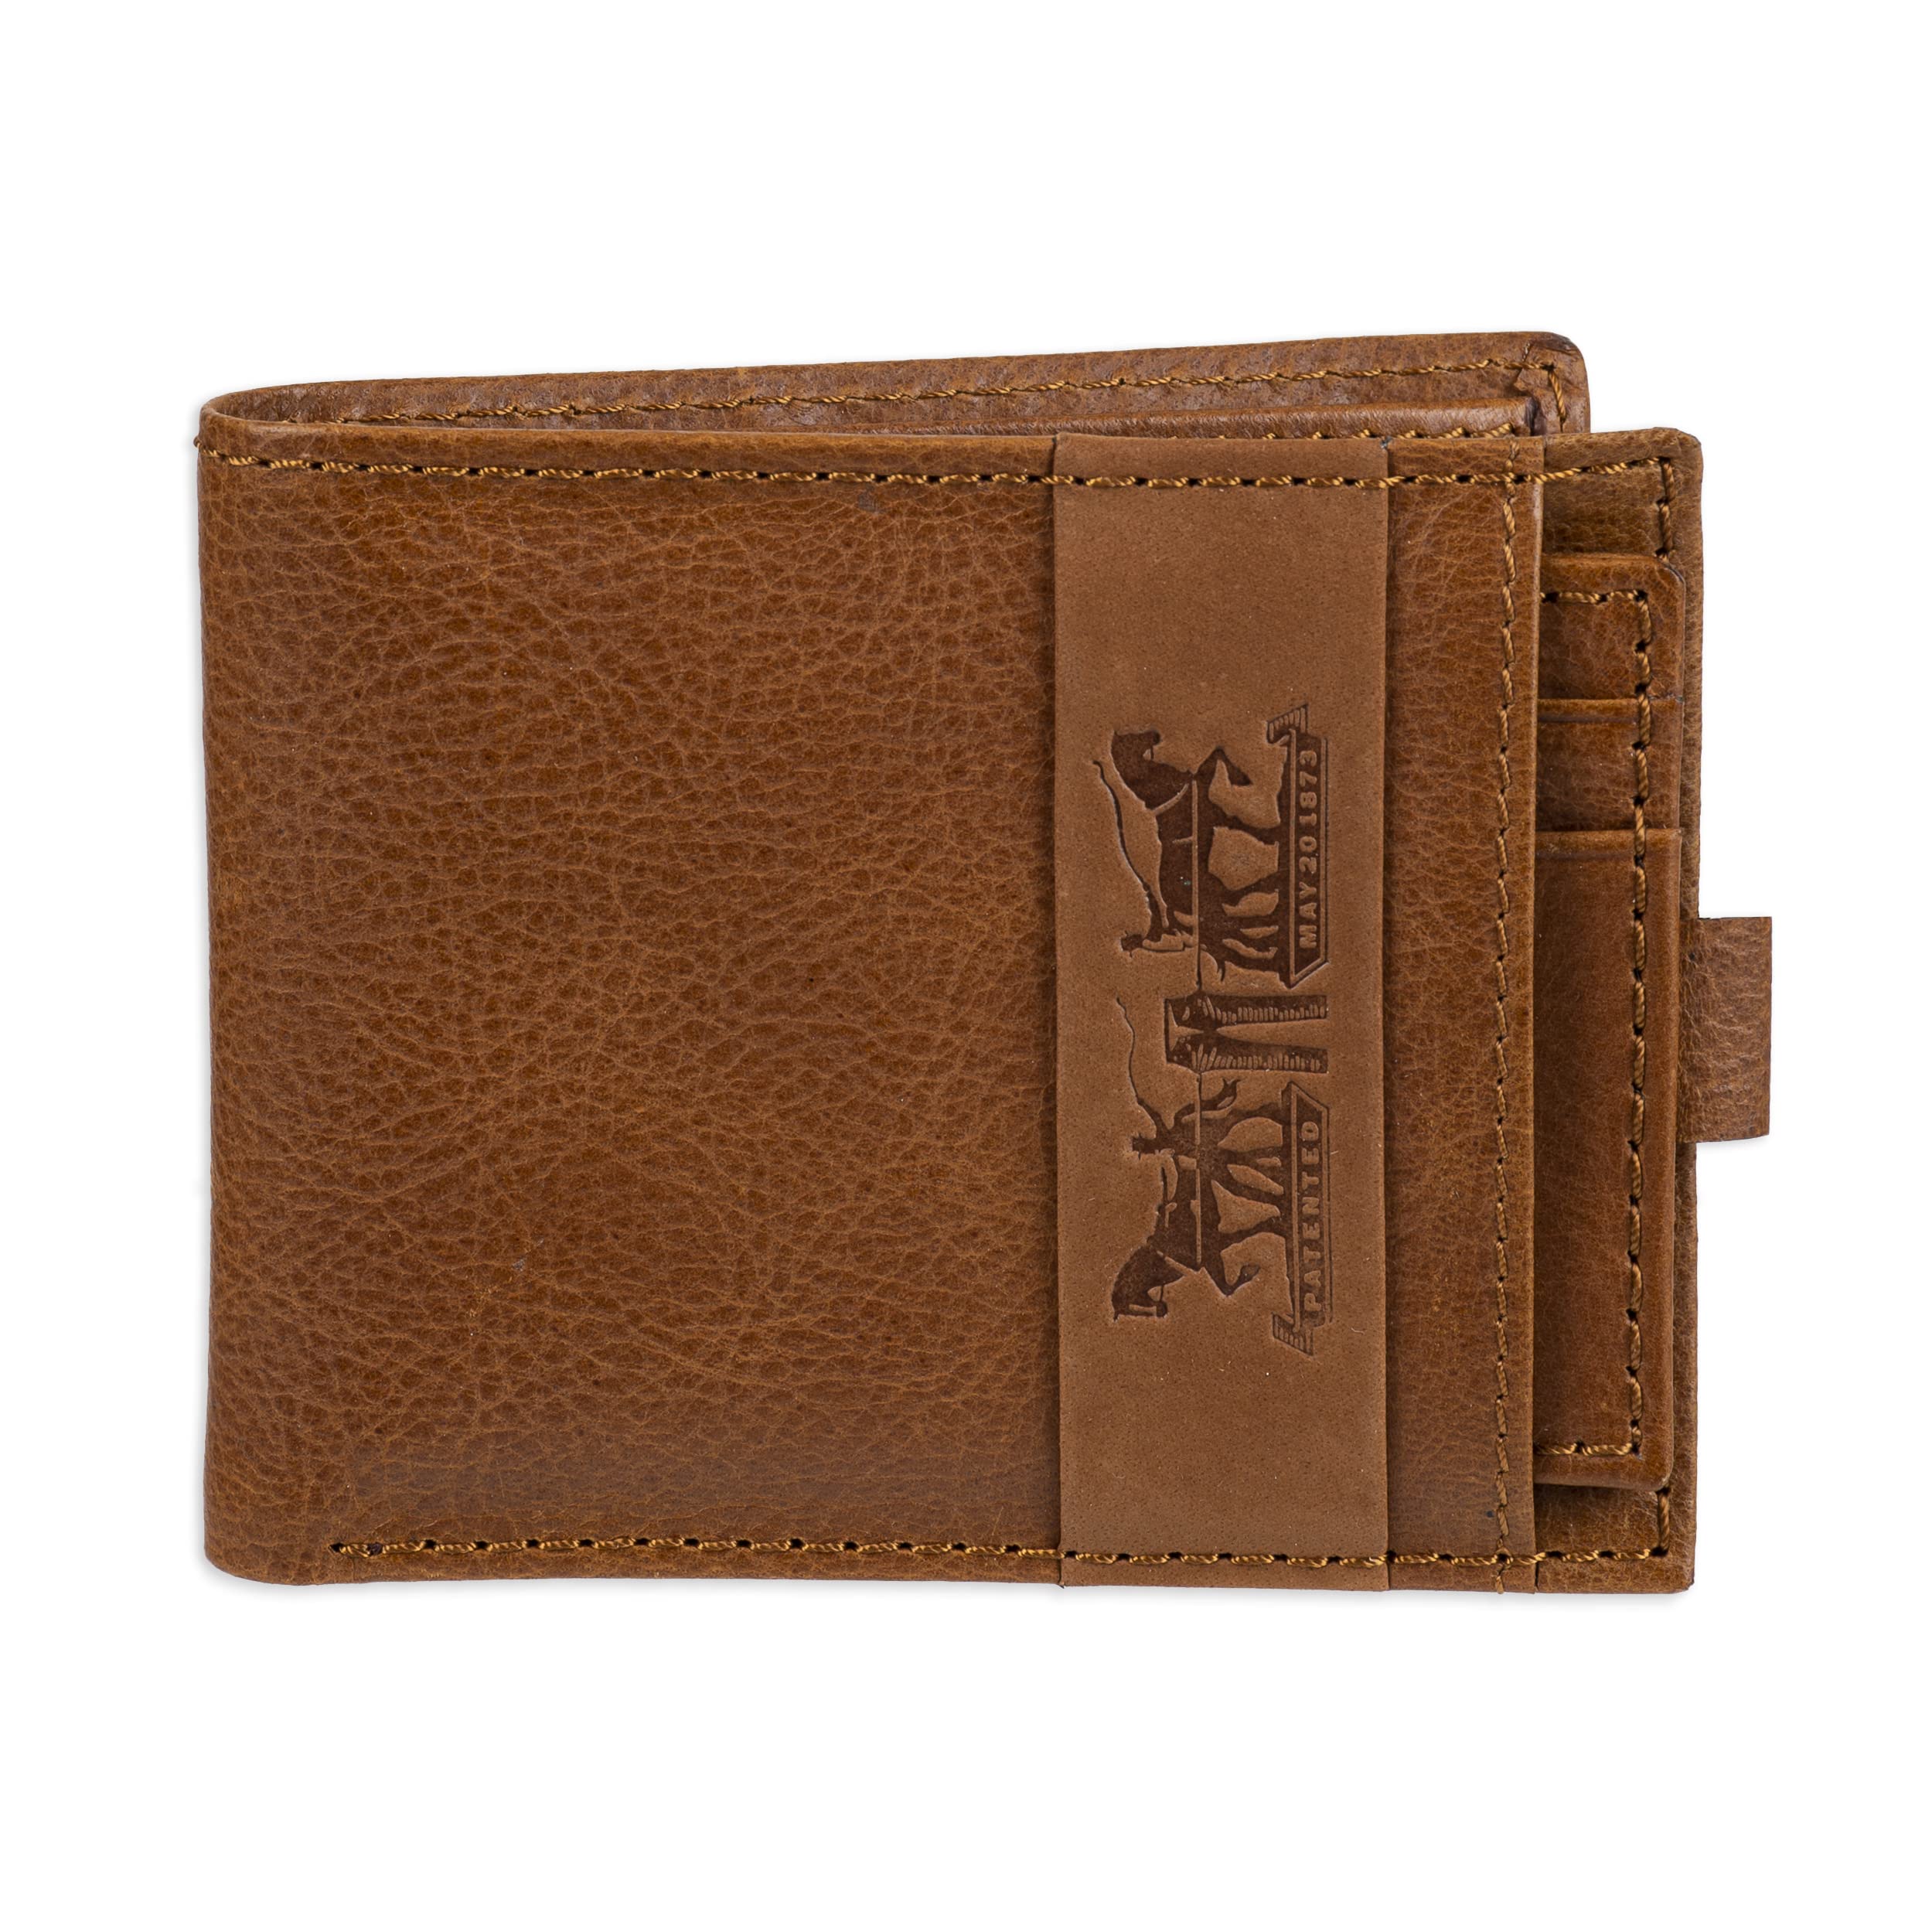 Levi's Levis Mens RFID Slimfold with Removable card case Wallet, TAN, One Size